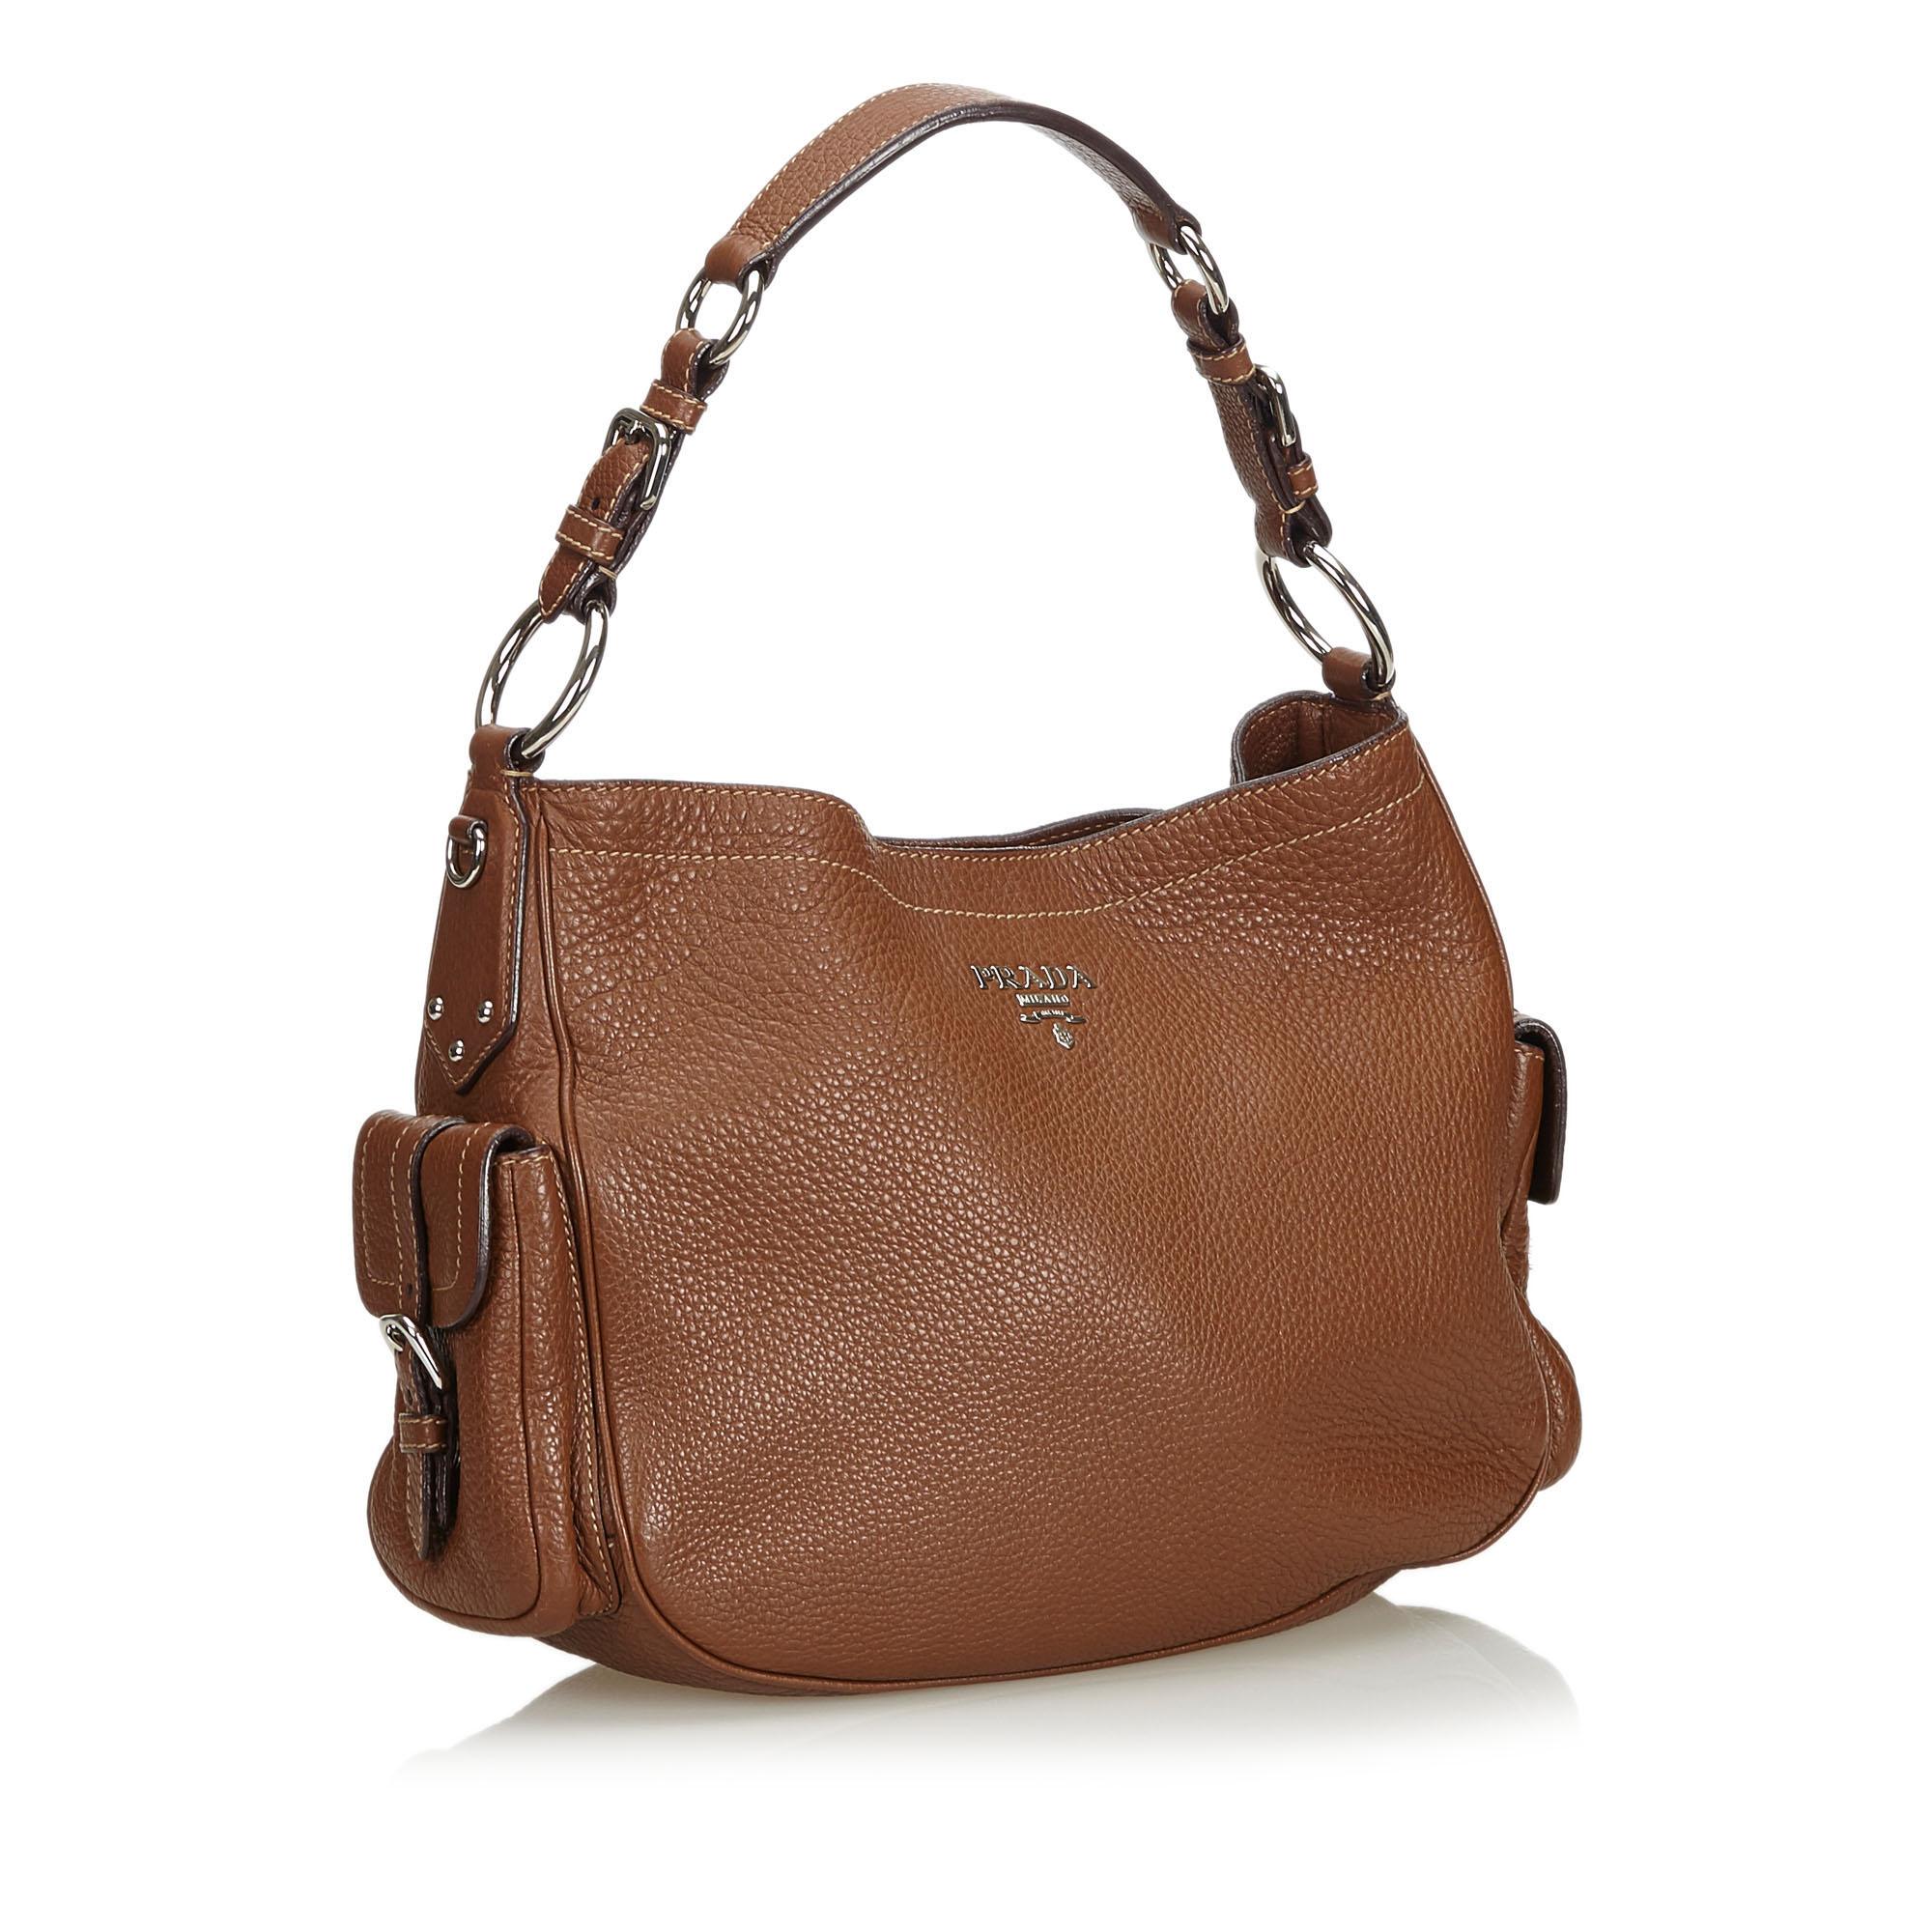 This shoulder bag features a leather body, exterior flap pockets, a flat leather strap, an open top with a magnetic snap button closure, and an interior zip pocket. It carries as B+ condition rating.

Inclusions: 
This item does not come with